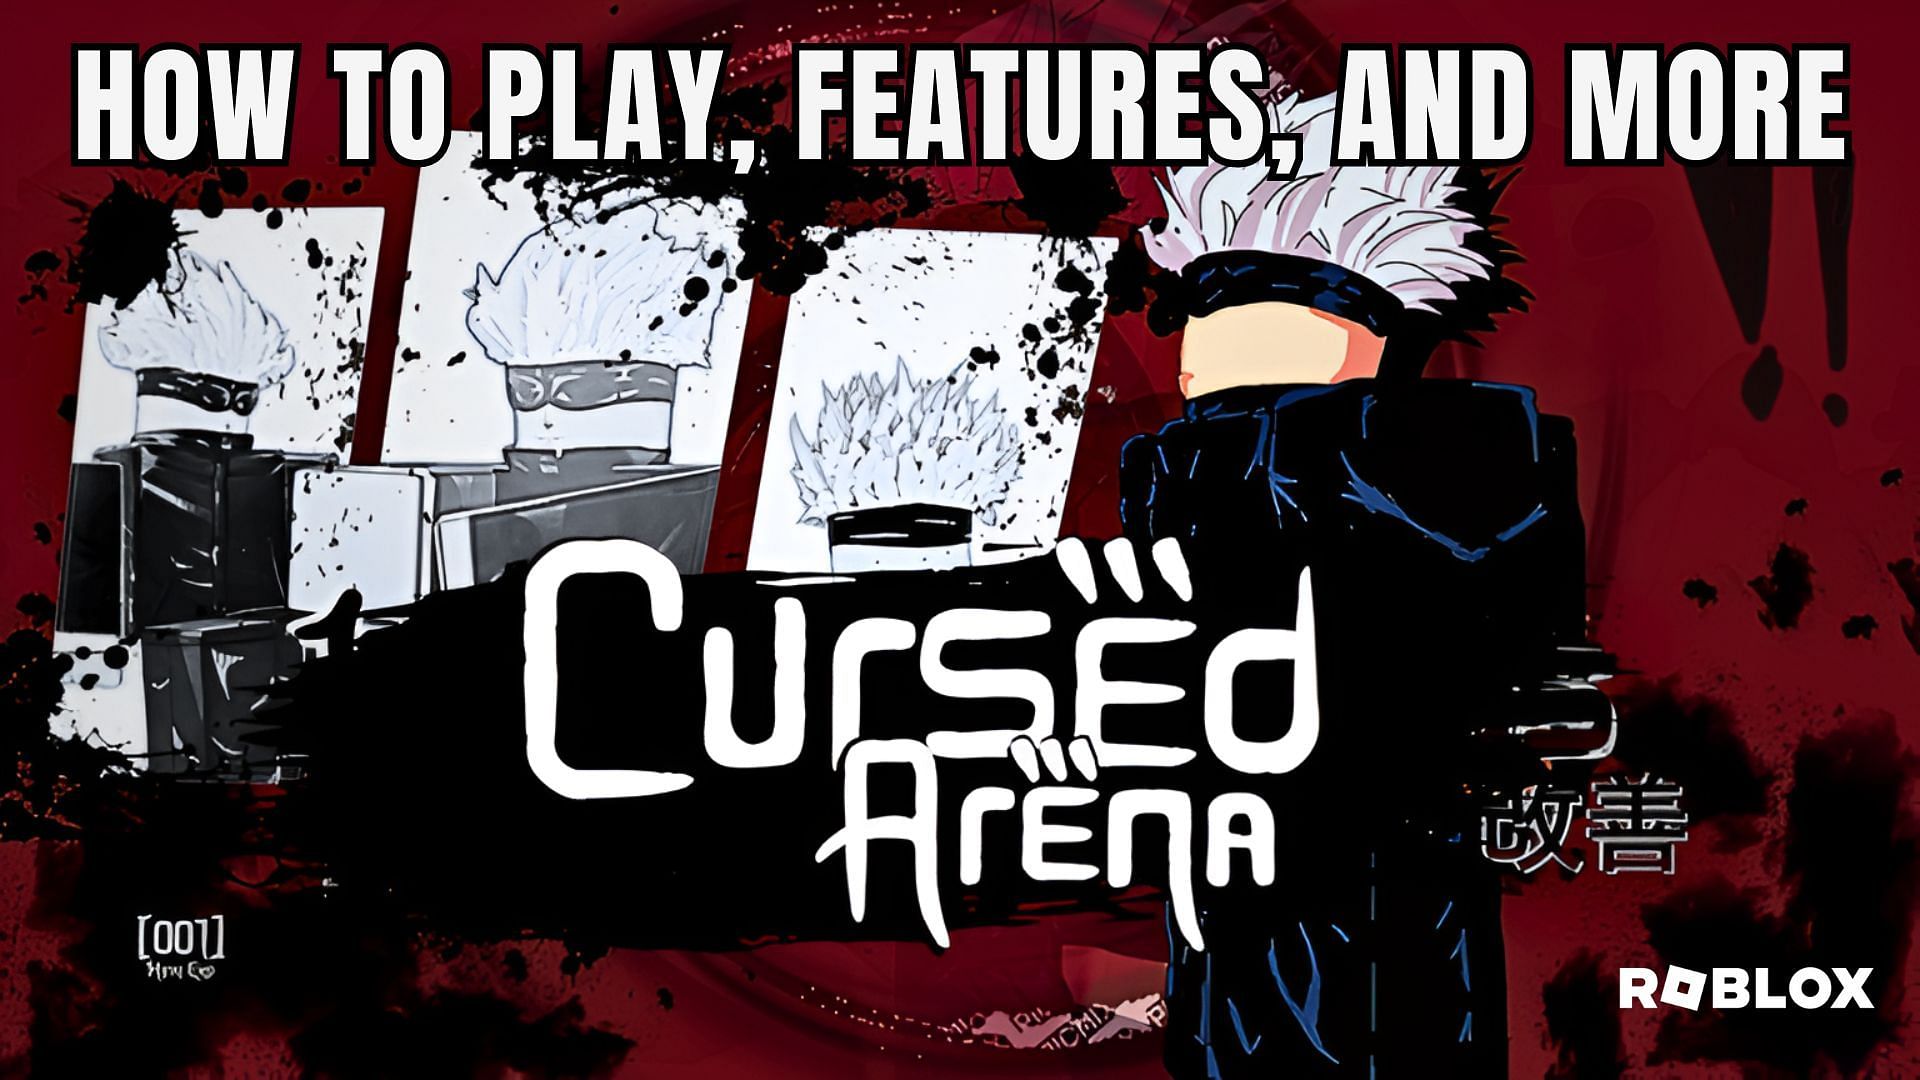 Roblox Cursed Arena: How to play, features, and more